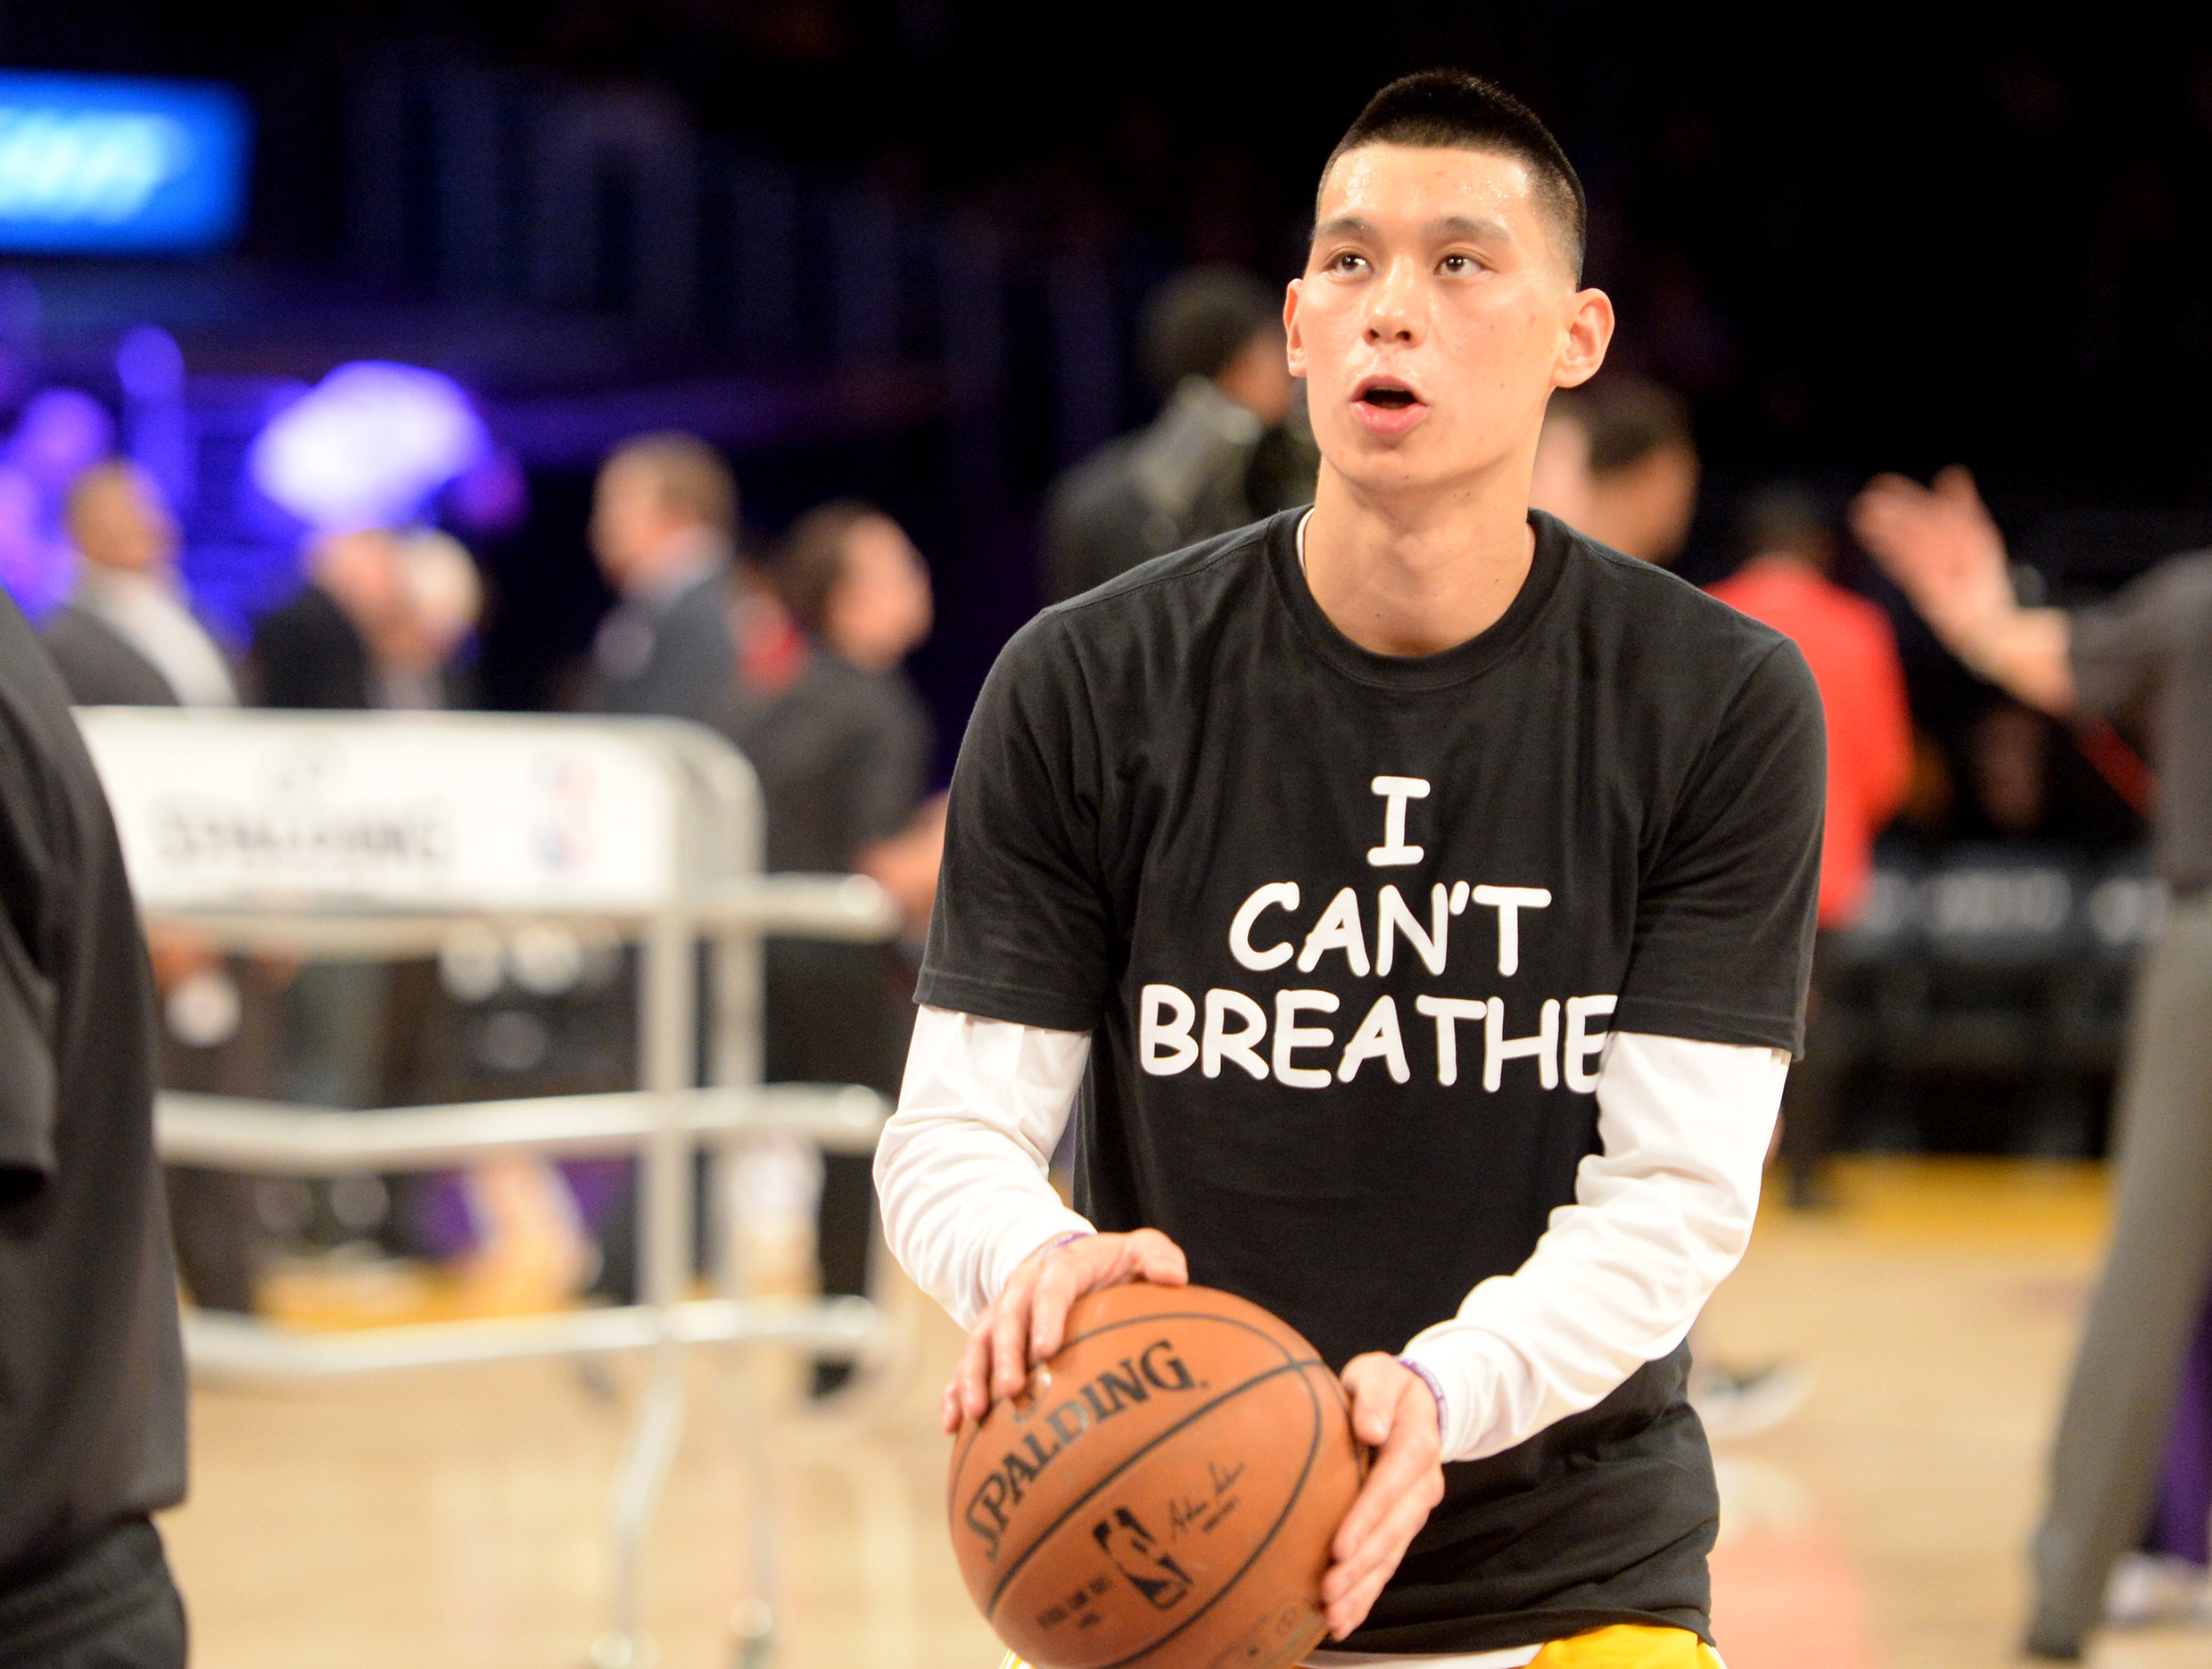 Dec 9, 2014; Los Angeles, CA, USA; Los Angeles Lakers guard Jeremy Lin (17) wears a t-shirt during warm ups before the game against the Sacramento Kings to show support for the family of Eric Garner at Staples Center. (Jayne Kamin-Oncea-USA TODAY Sports)